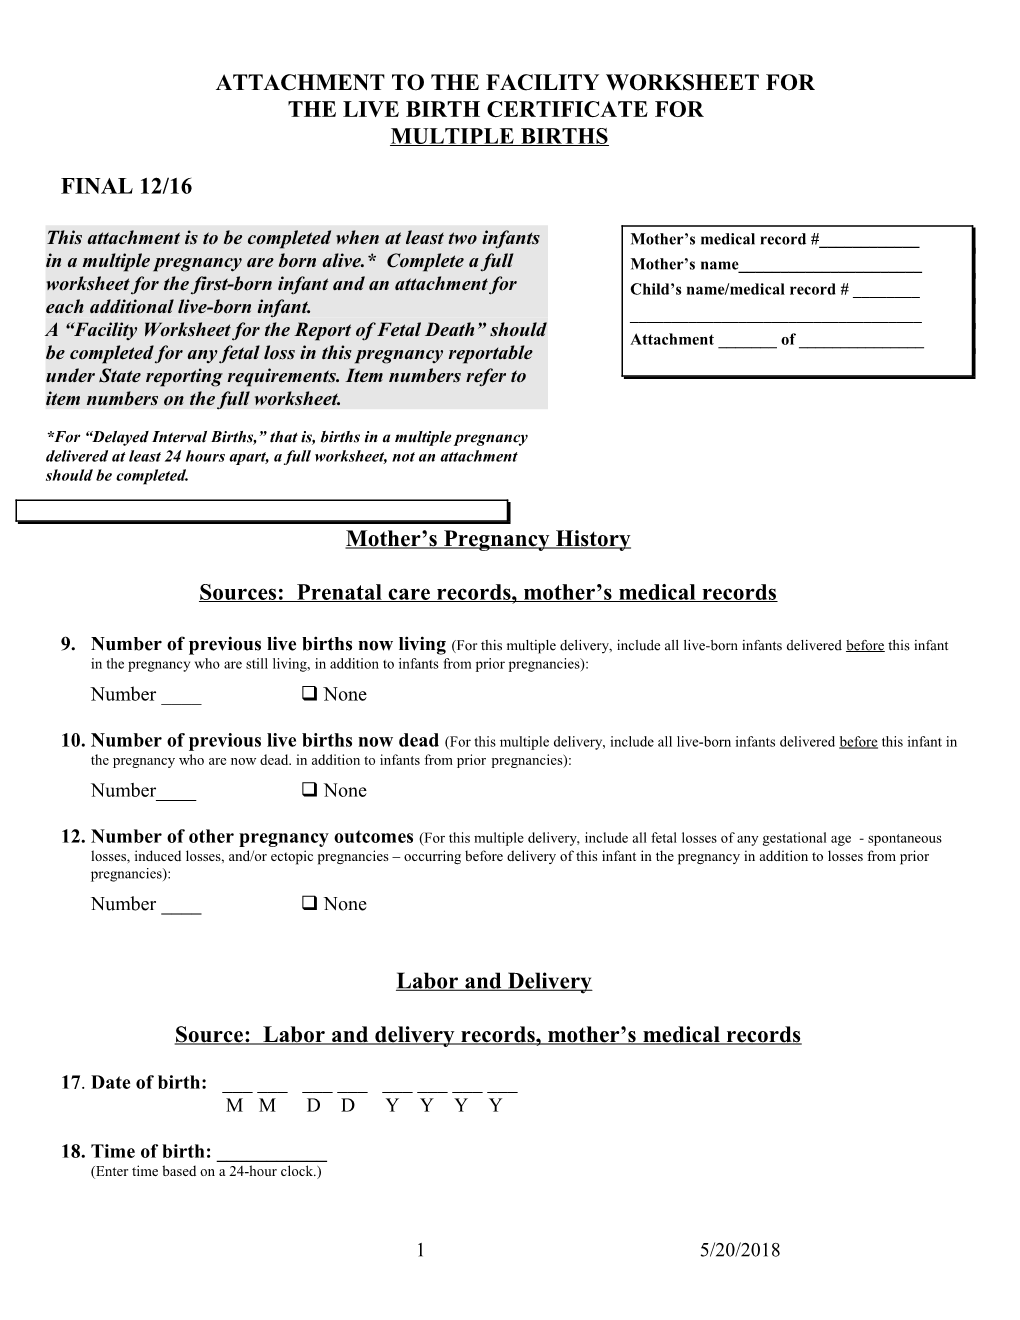 Attachment to the Facility Worksheet For